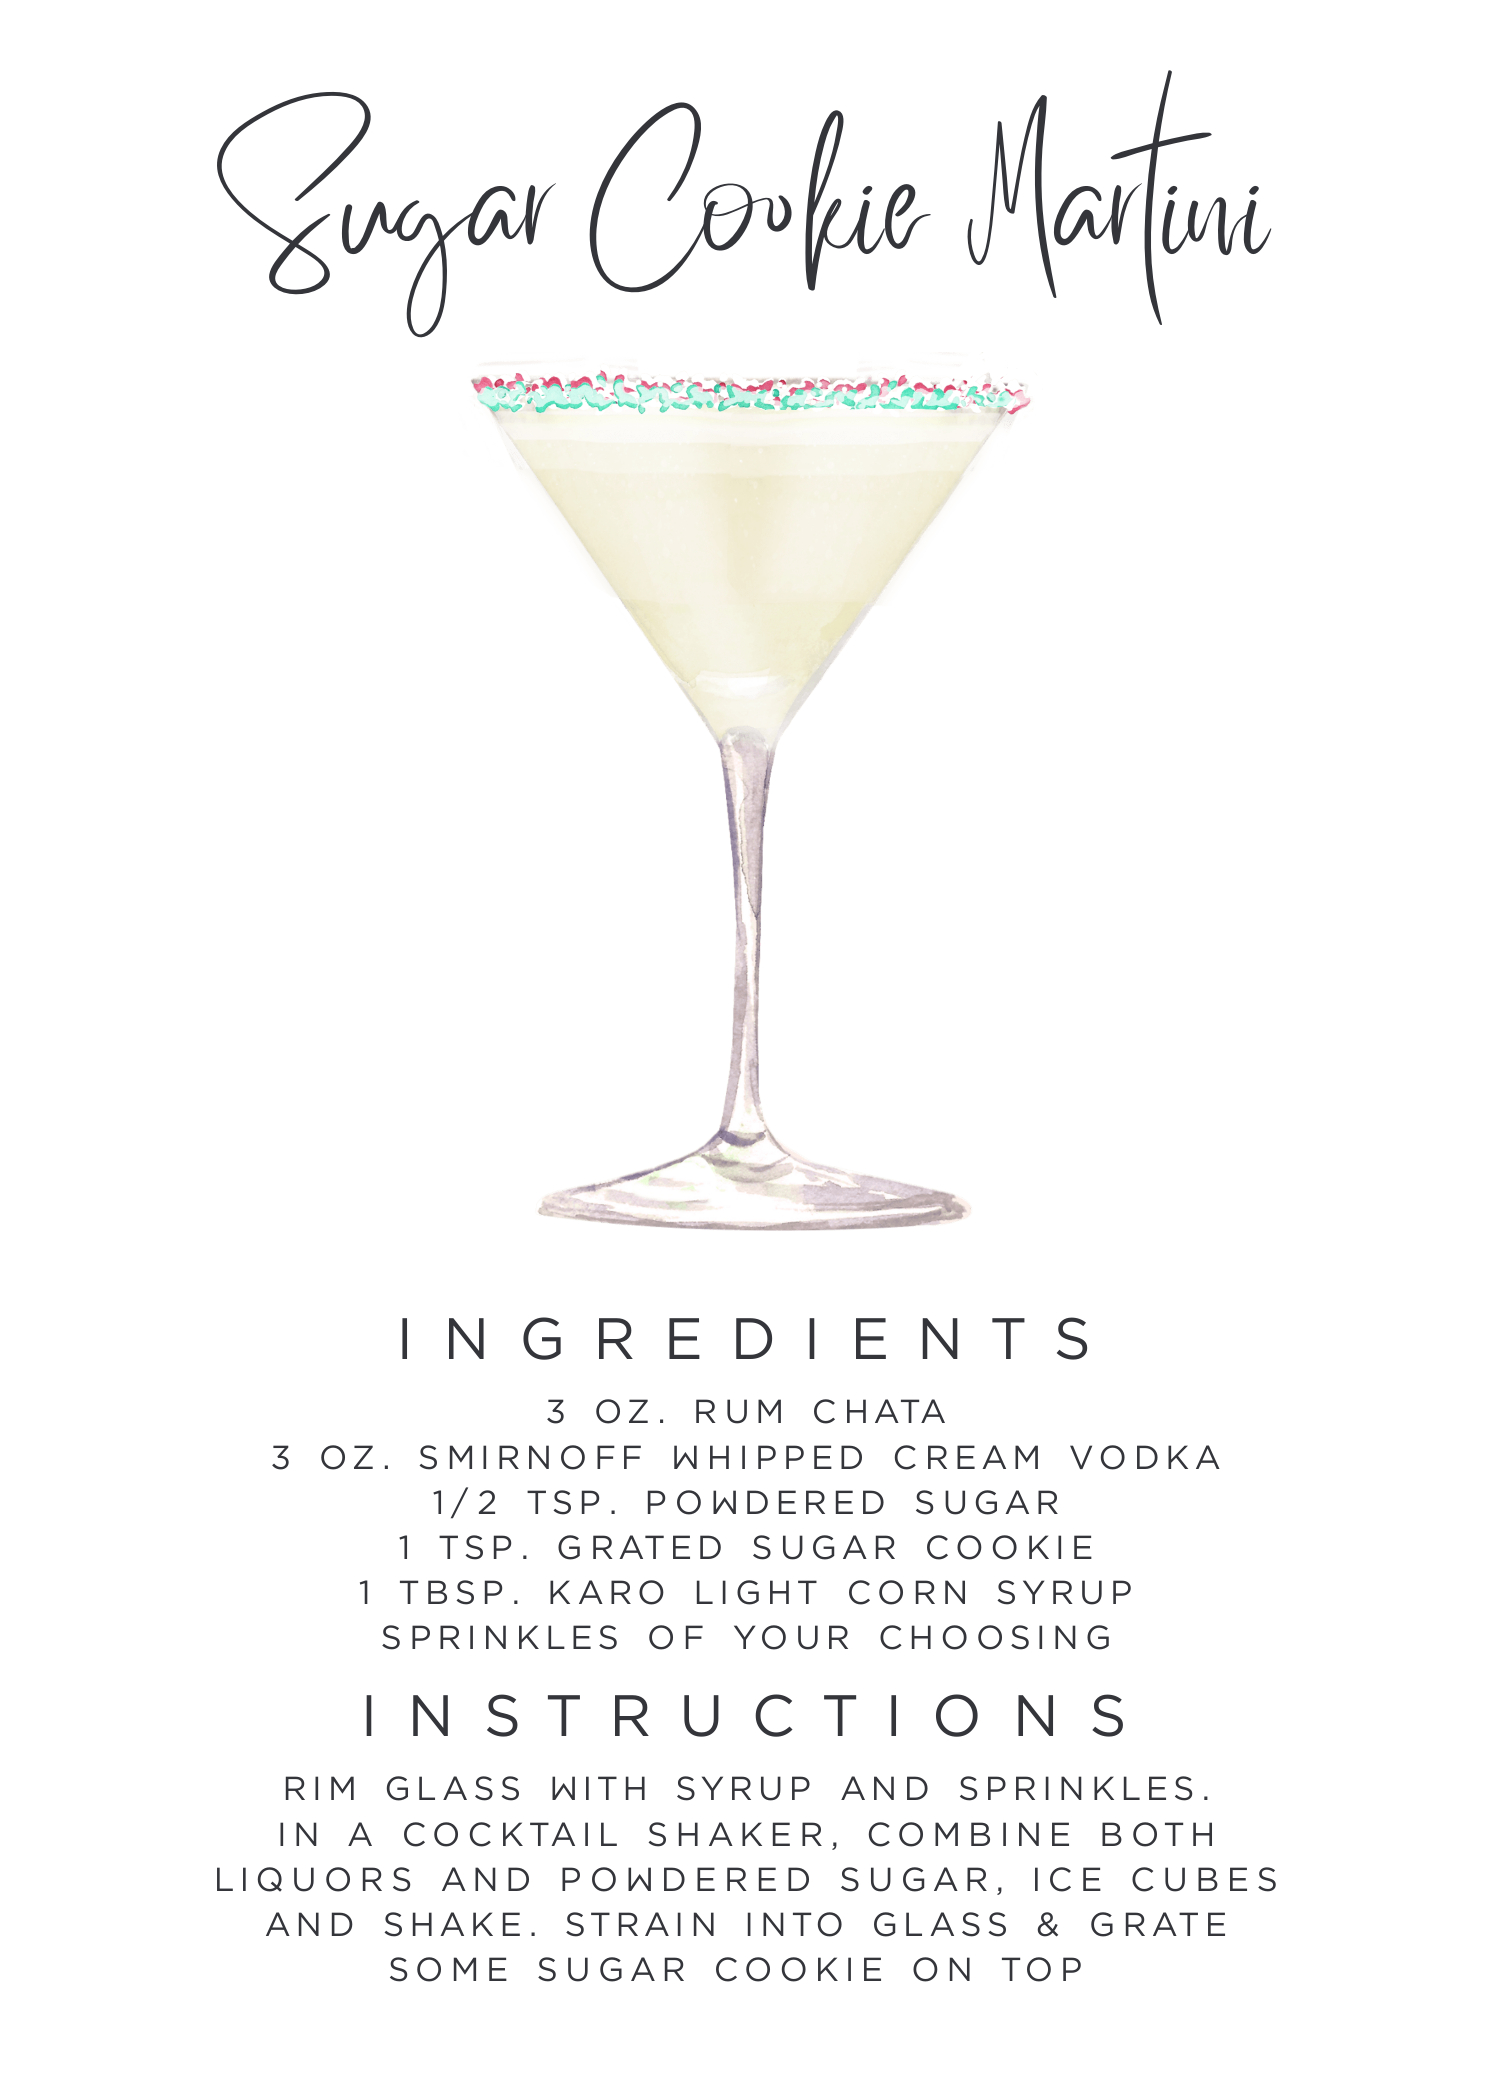 Holiday Cocktail recipes